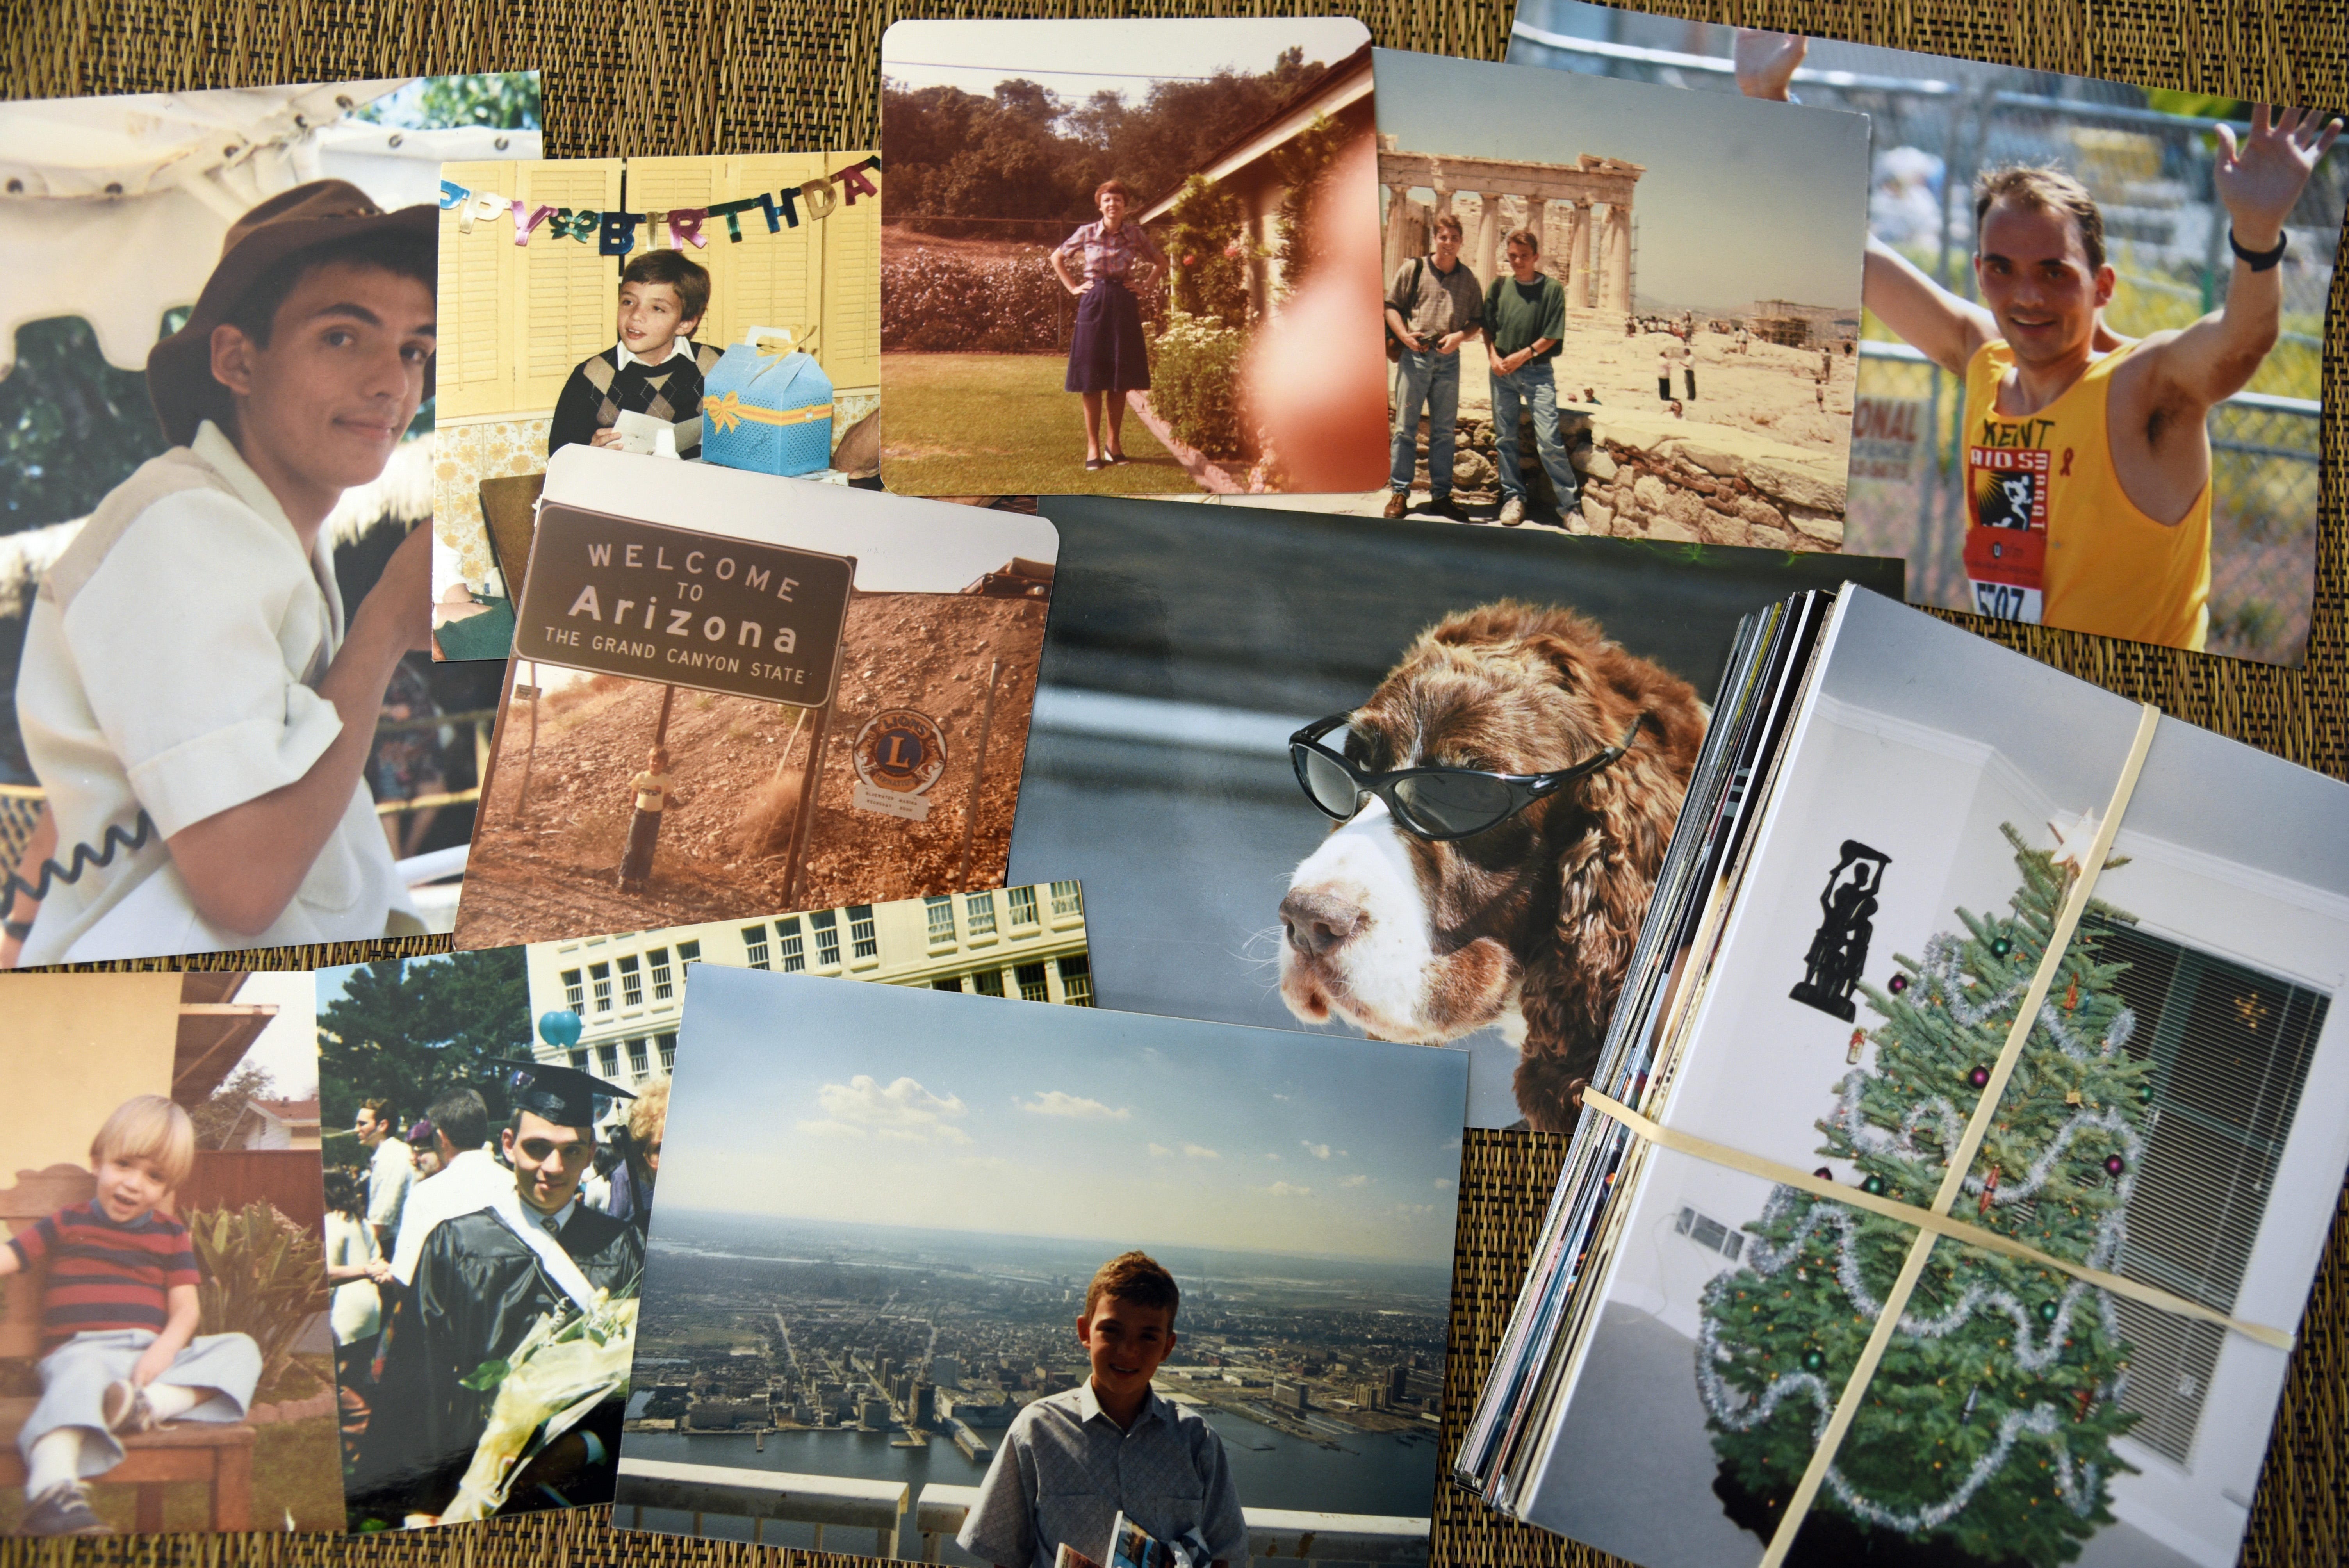 Memories in a shoebox: Digitizing old photos unlocks a flood of mixed emotions